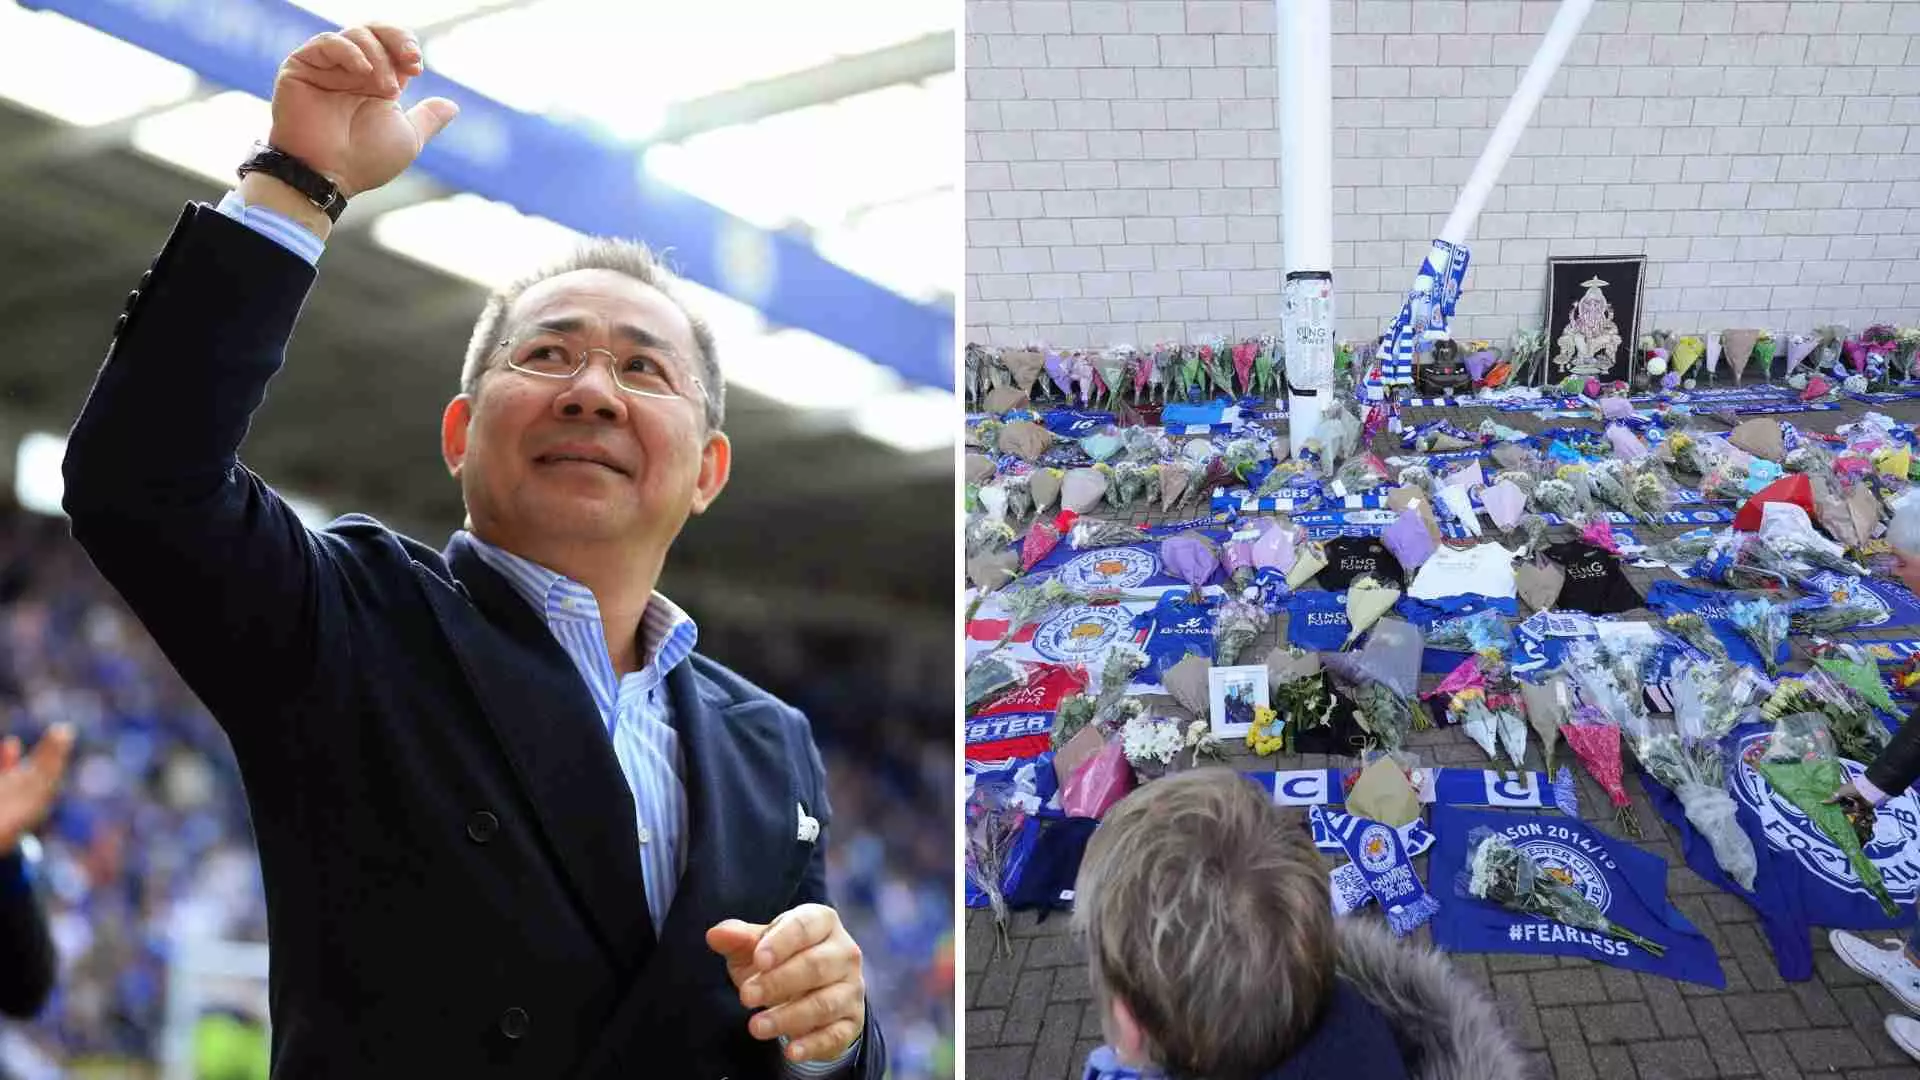 Leicester City Owner Vichai Srivaddhanaprabha Has Passed Away Aged 61